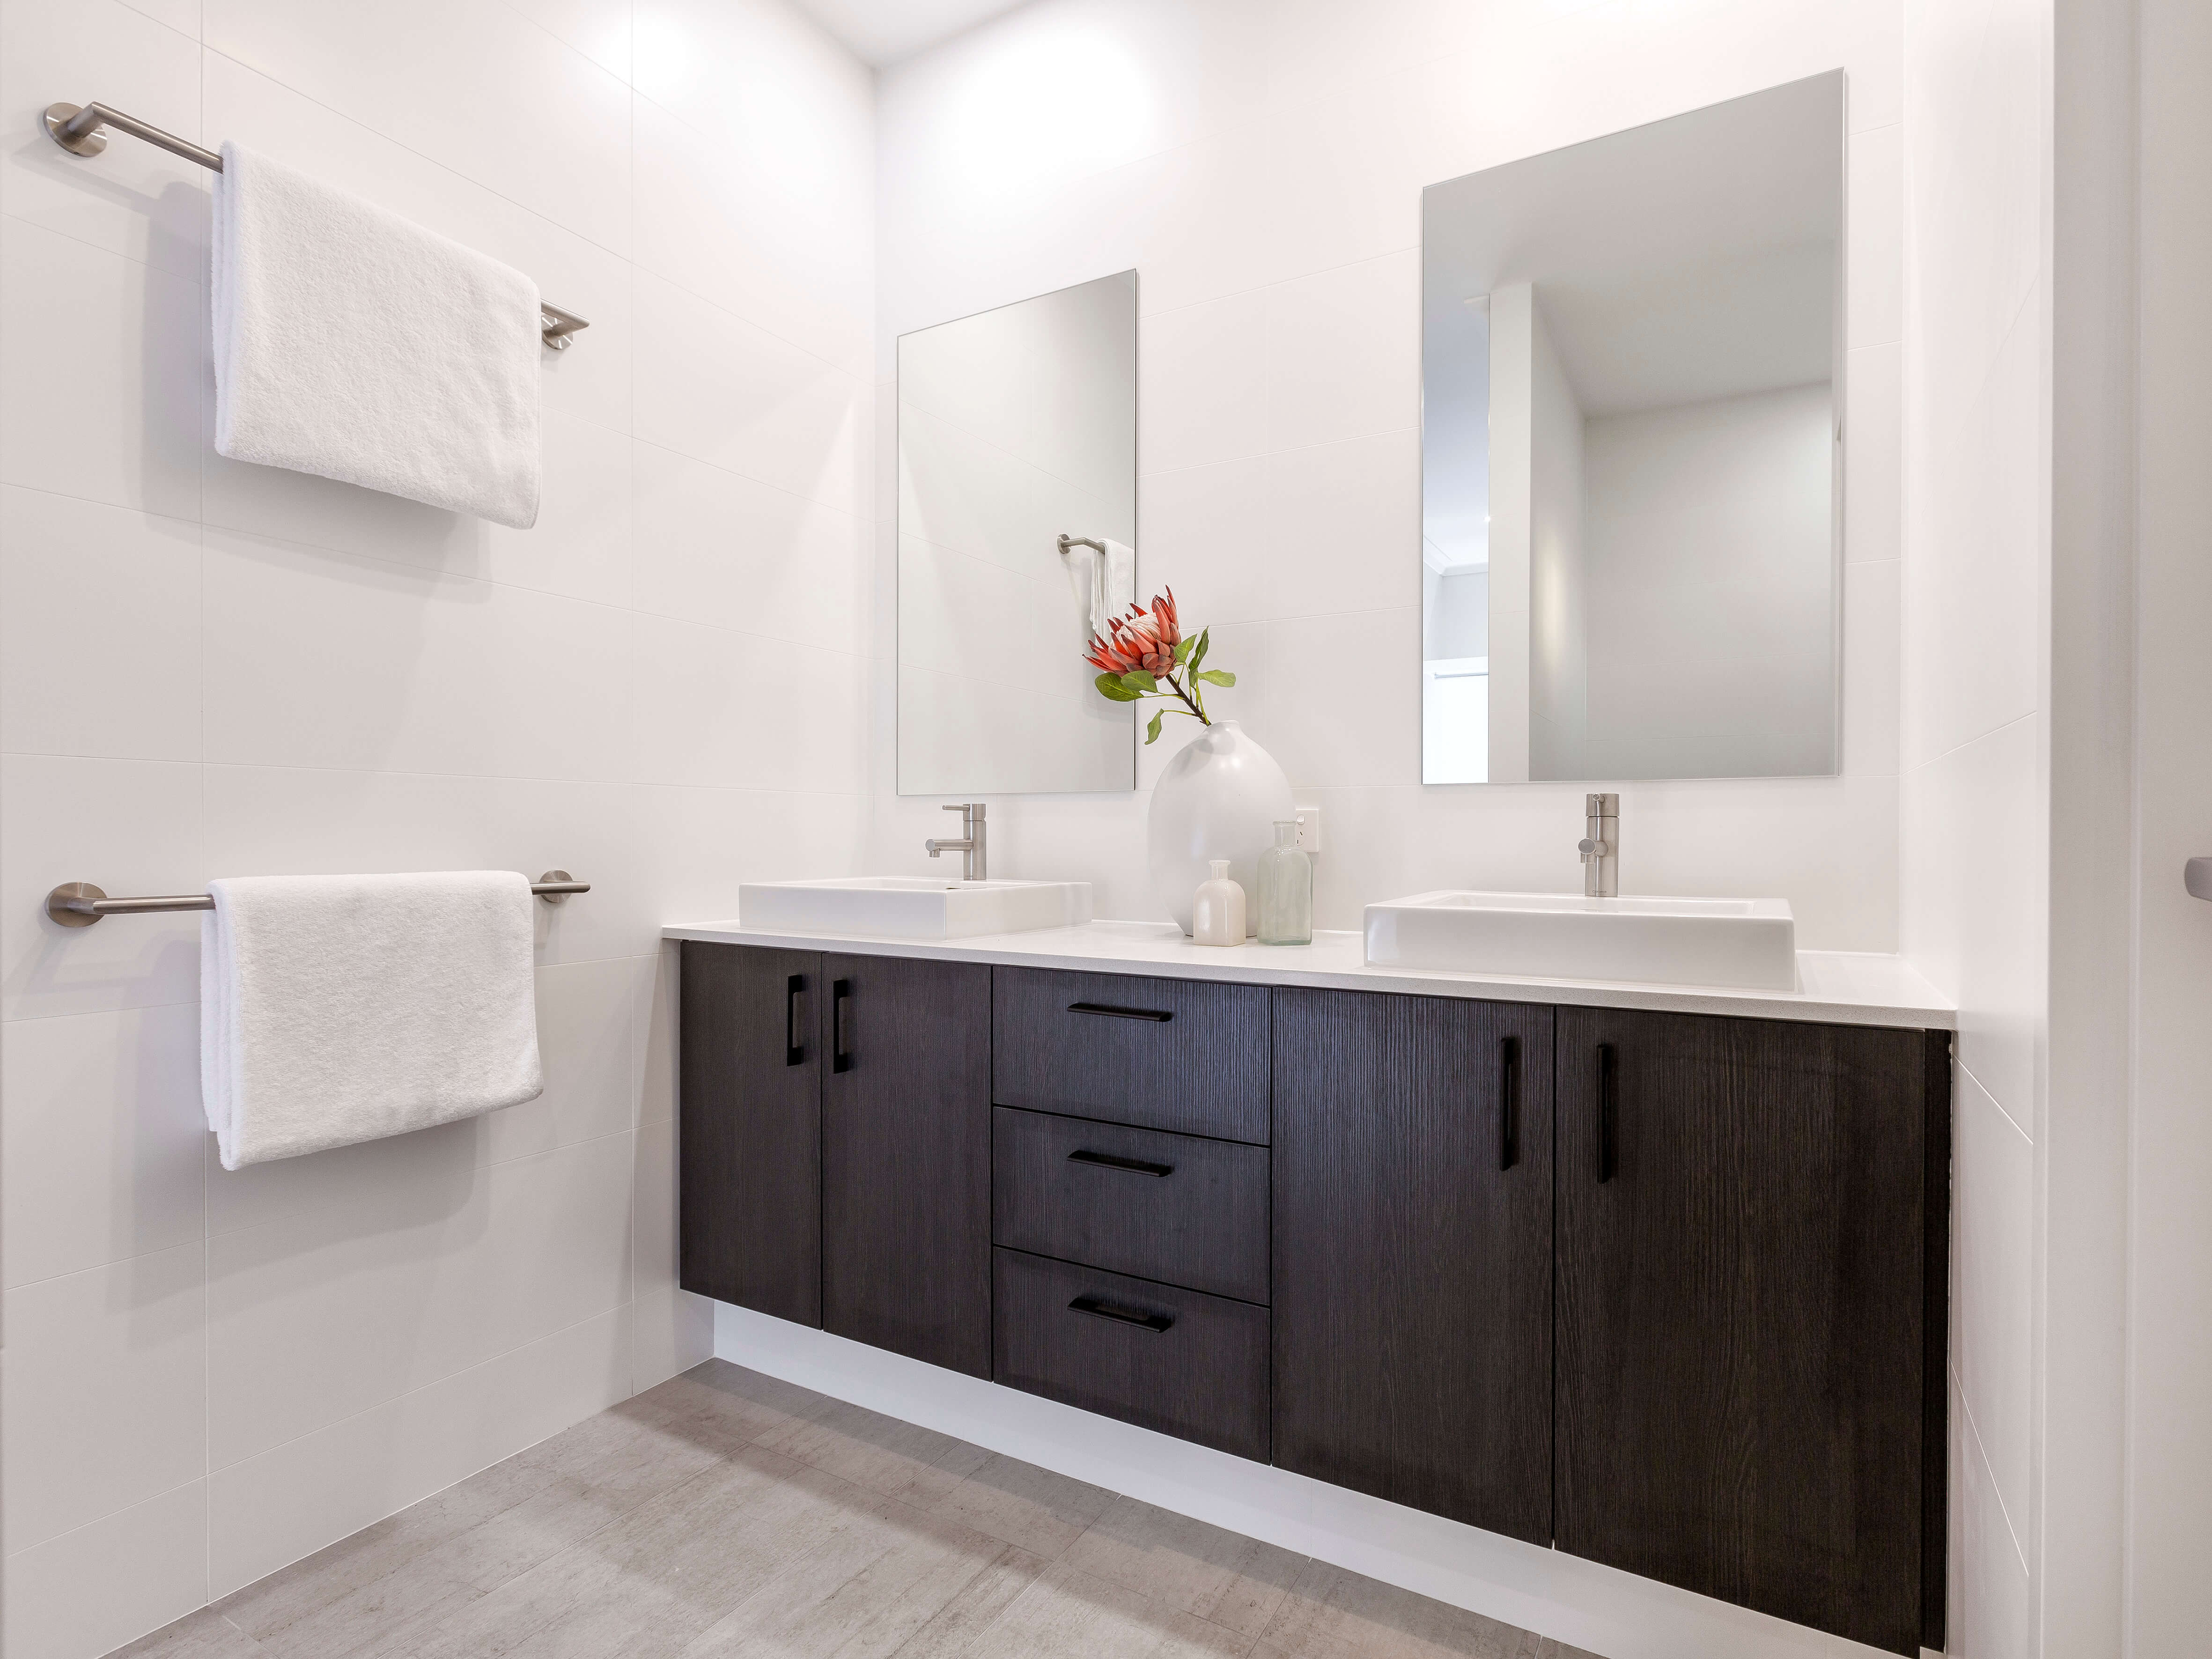 Bathroom Renovations | Gallery Page | KBL Remodelling